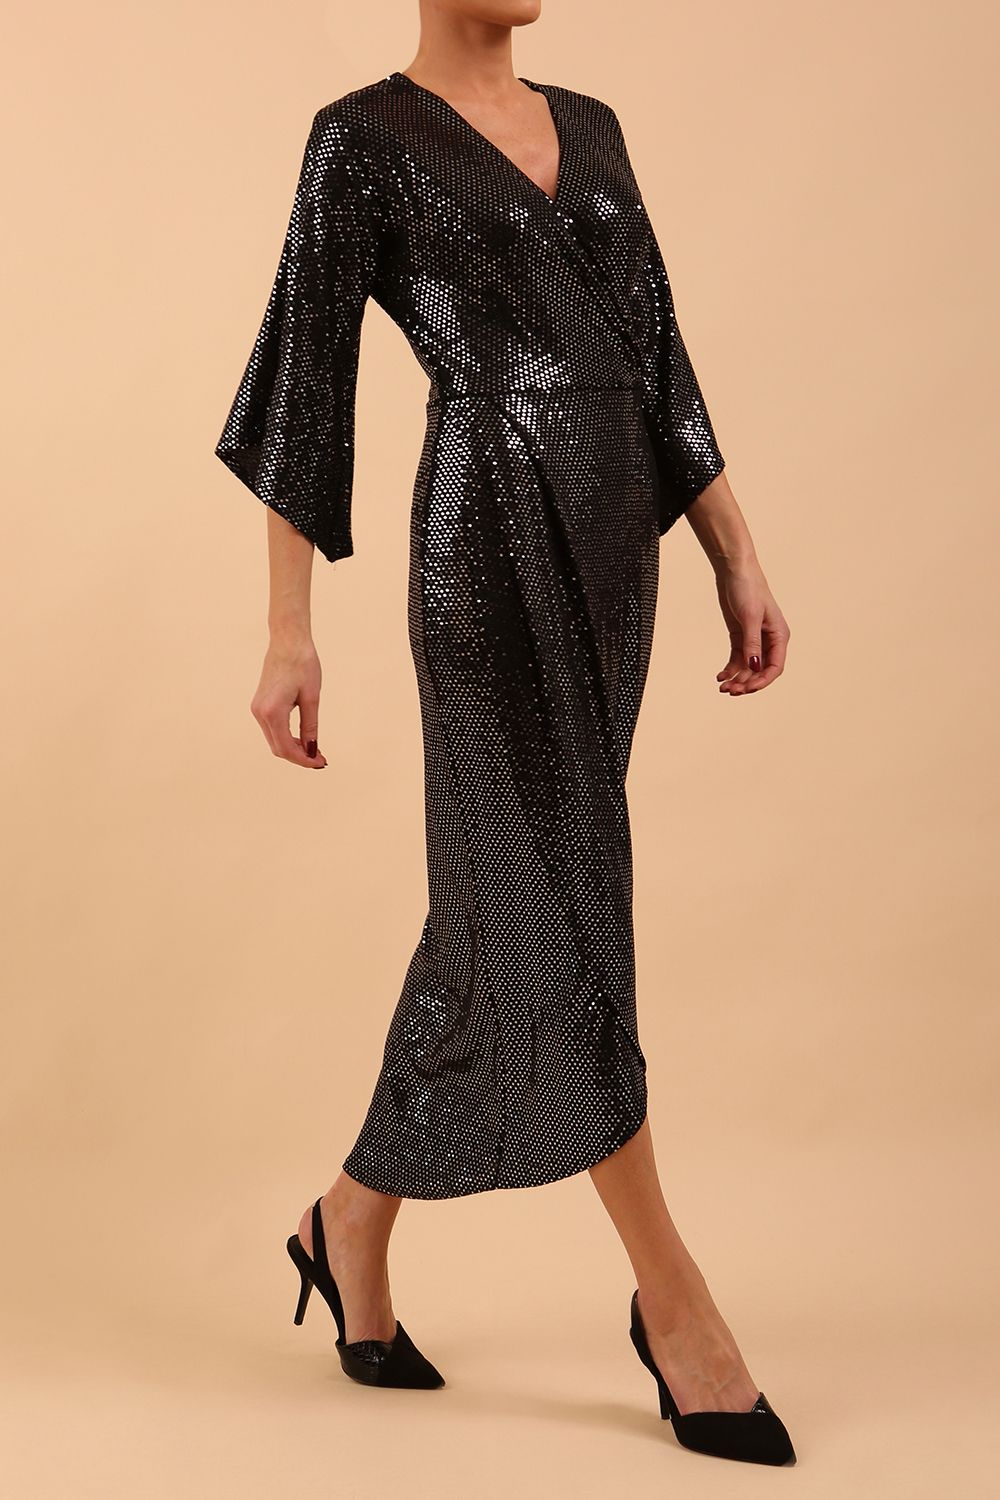 Brunette model wearing diva catwalk Glitterati Midaxi Sparkle Dress in Black in Jersey sparkle and ITY lining with wrap dress style and 3/4 length bell sleeves front side